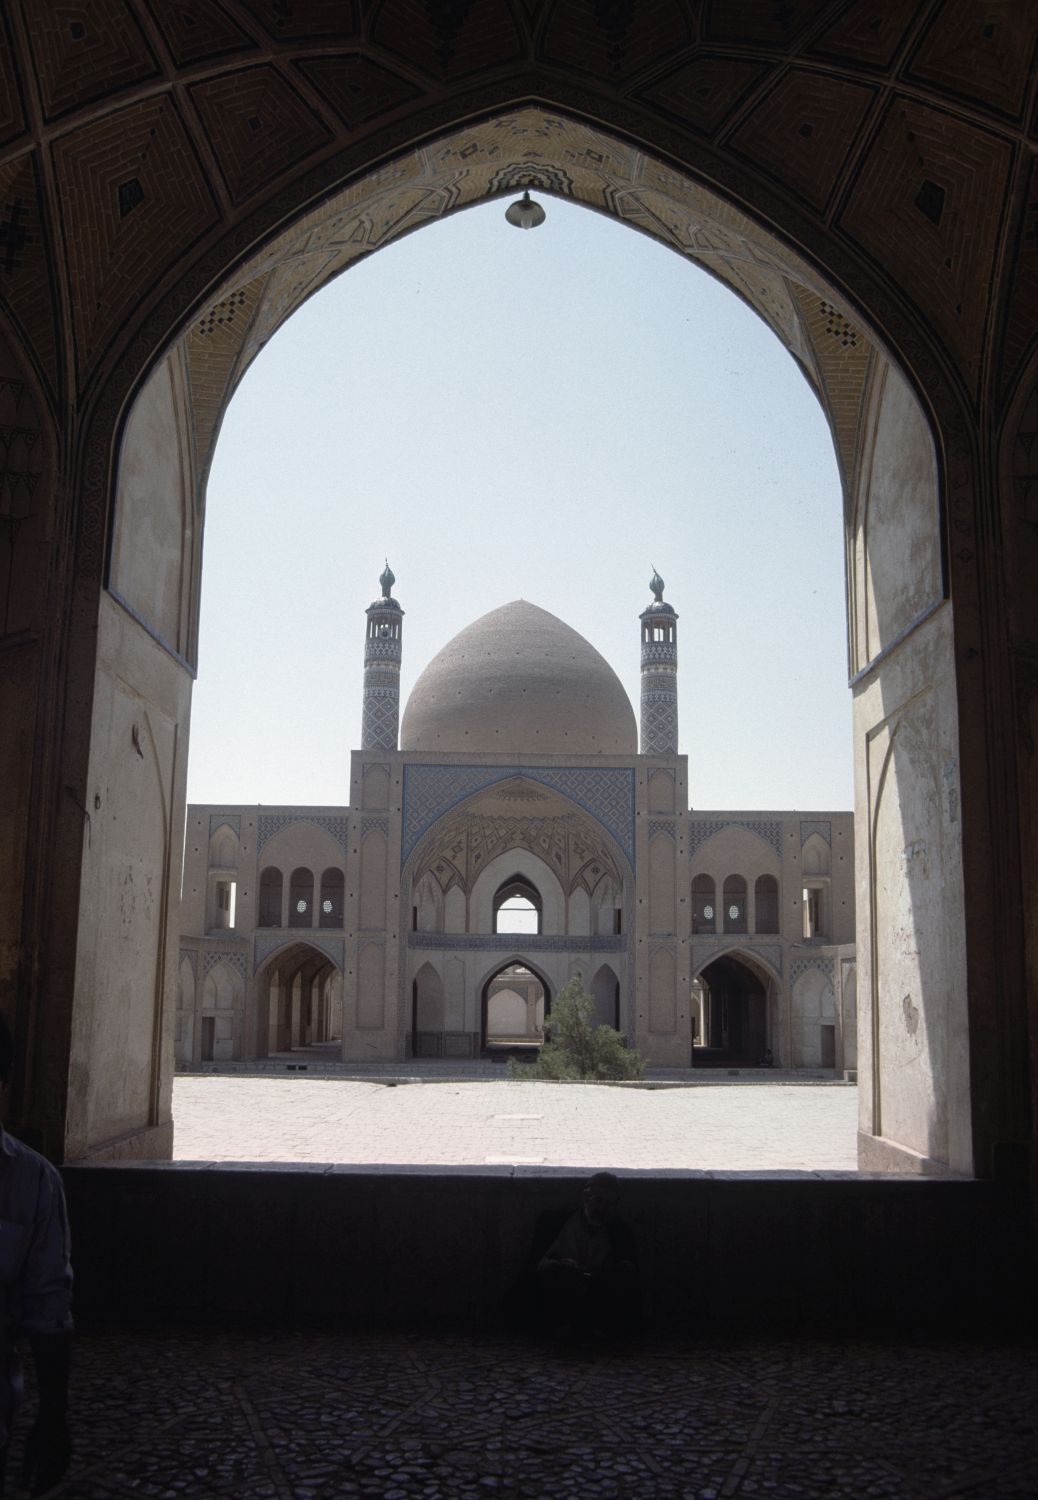 View through arch of entrance pavilion facing southeast across courtyard toward <span style="font-style: italic;">gunbad-khanah</span> assemblage.